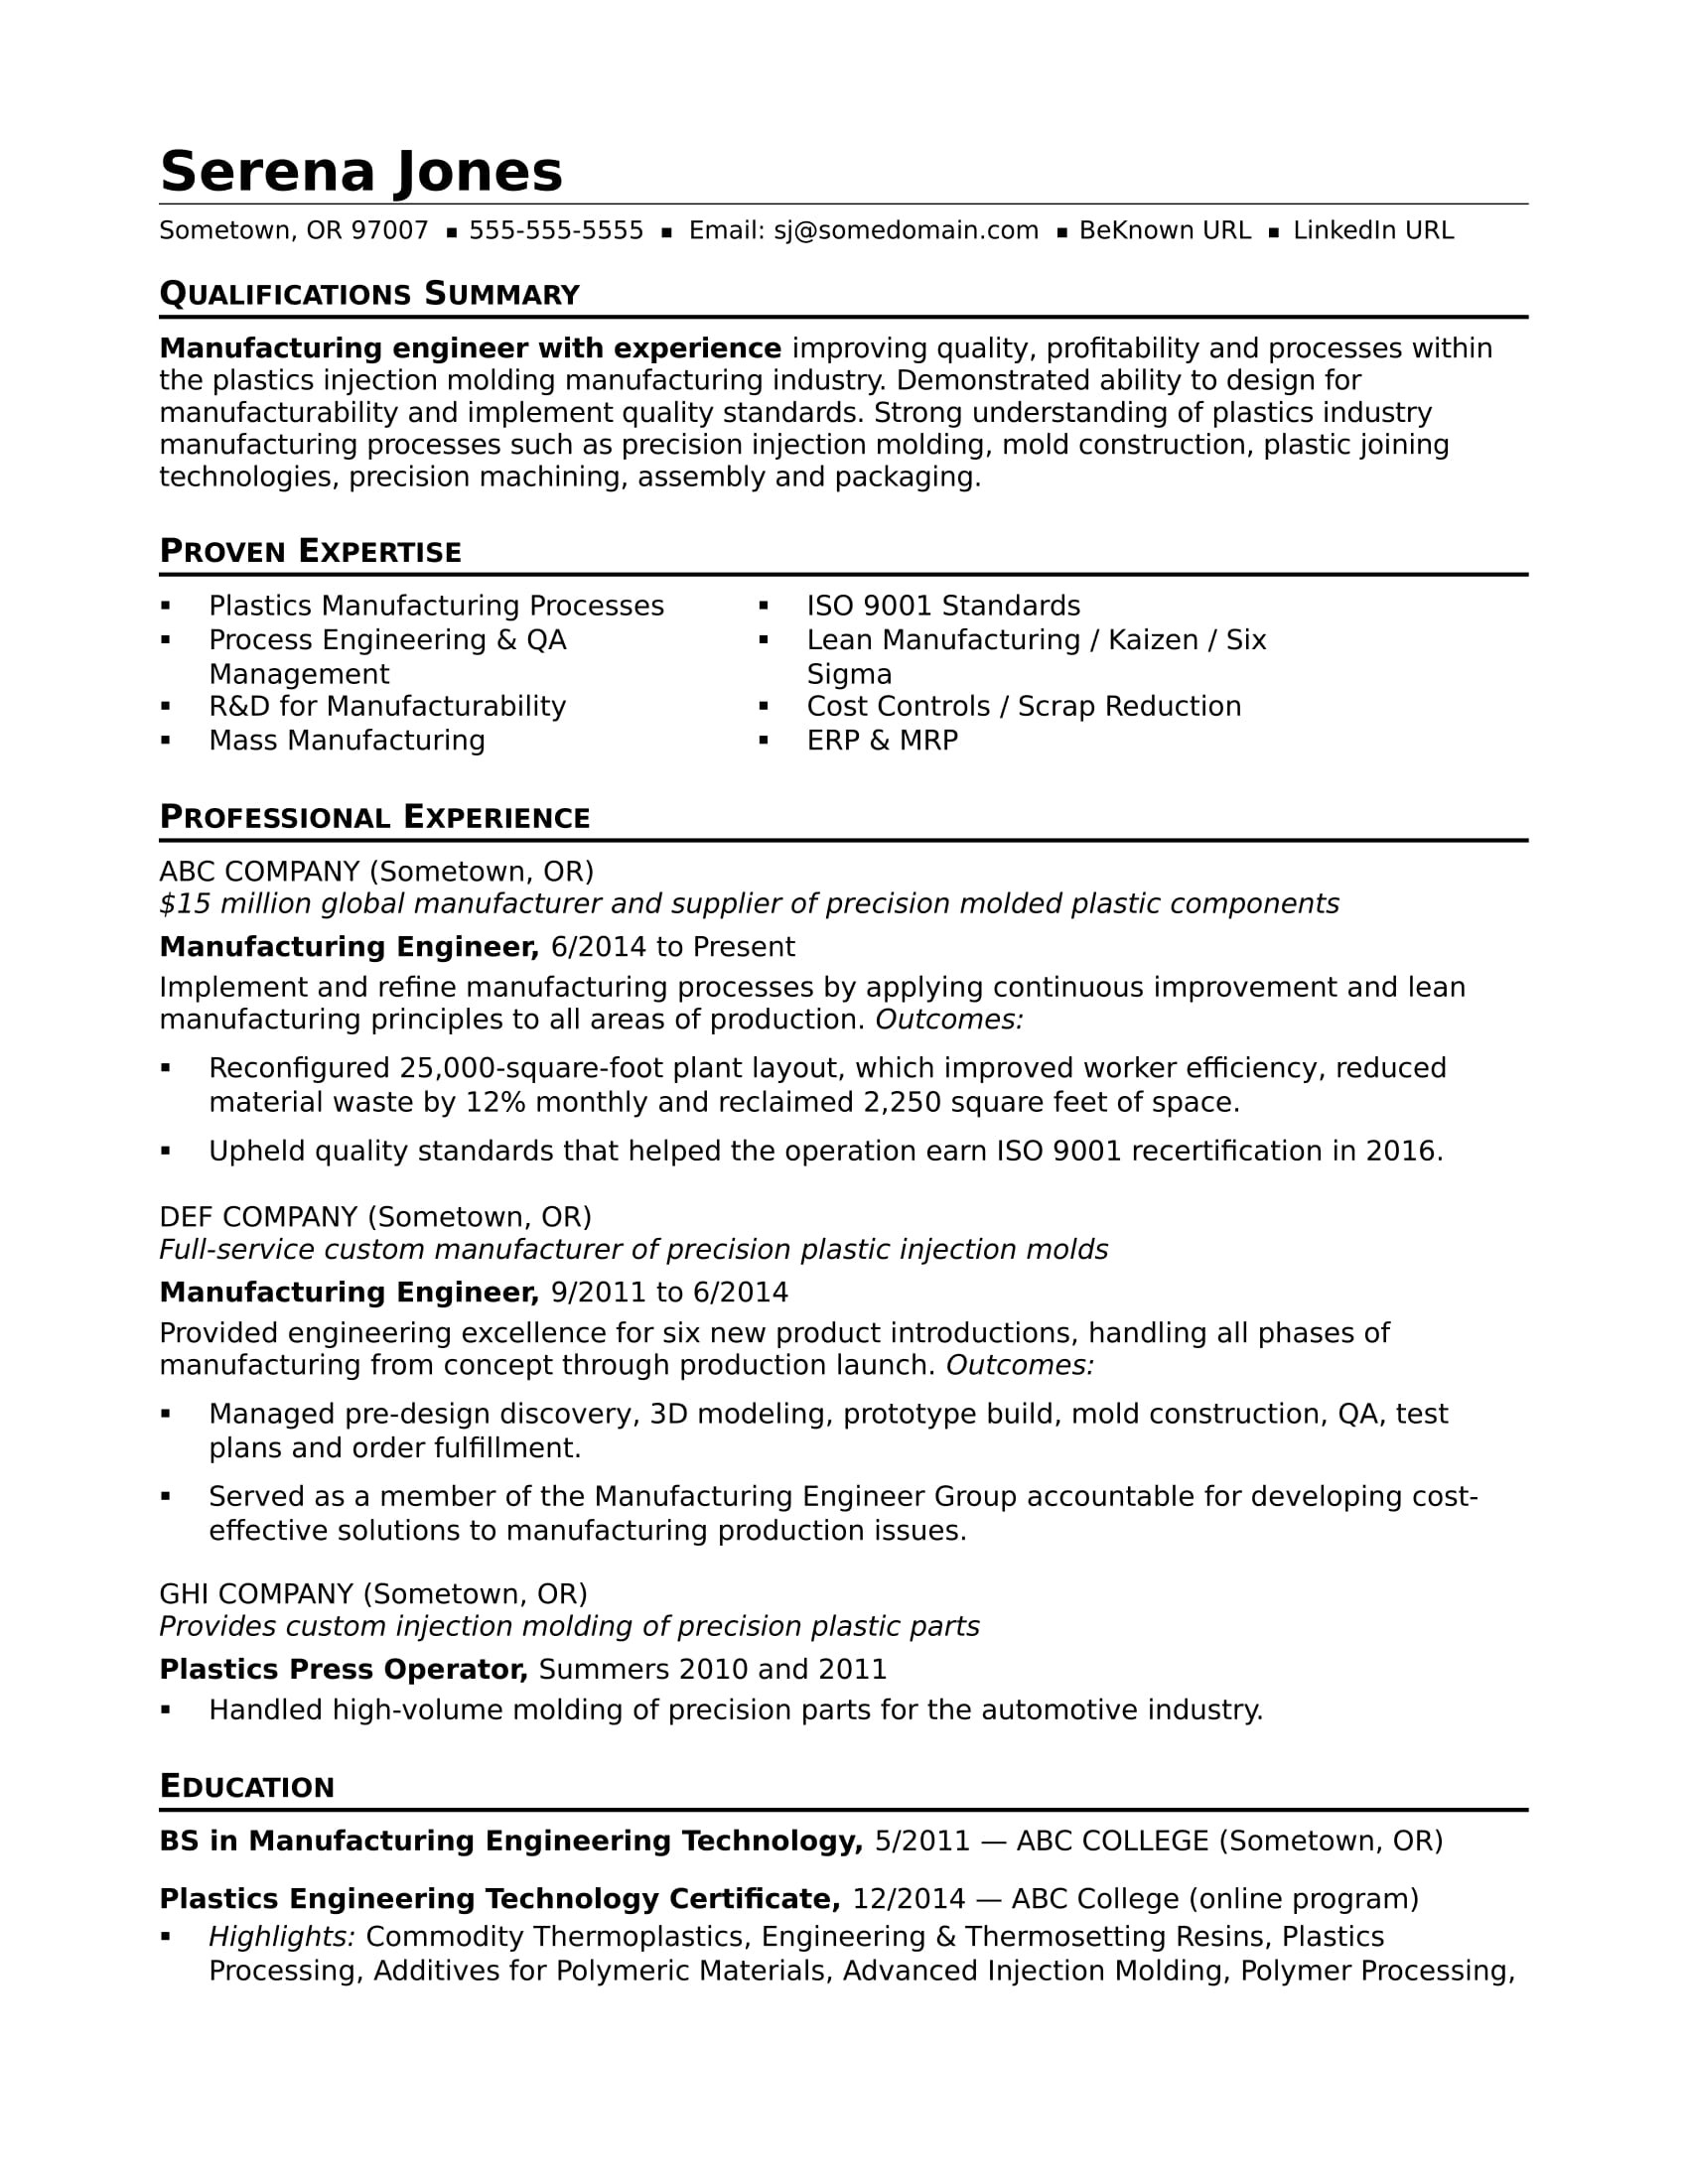 Sample Resume for Entry Level Product Engineer Manufacturing Engineer Resume Sample Monster.com